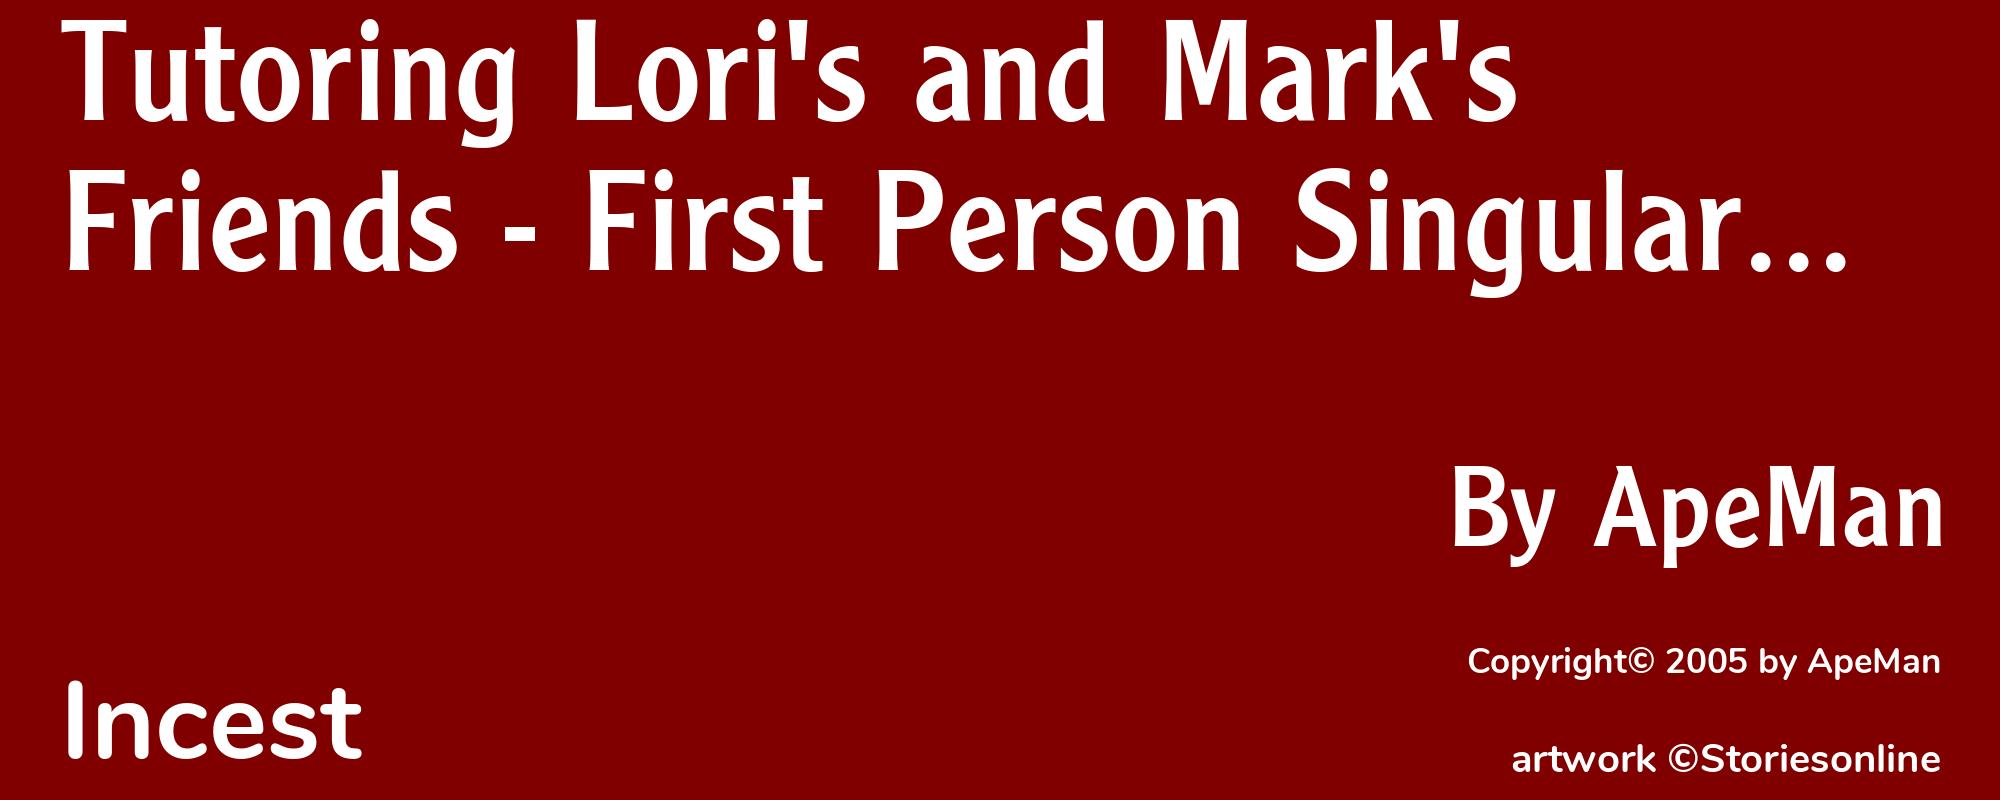 Tutoring Lori's and Mark's Friends - First Person Singular... - Cover